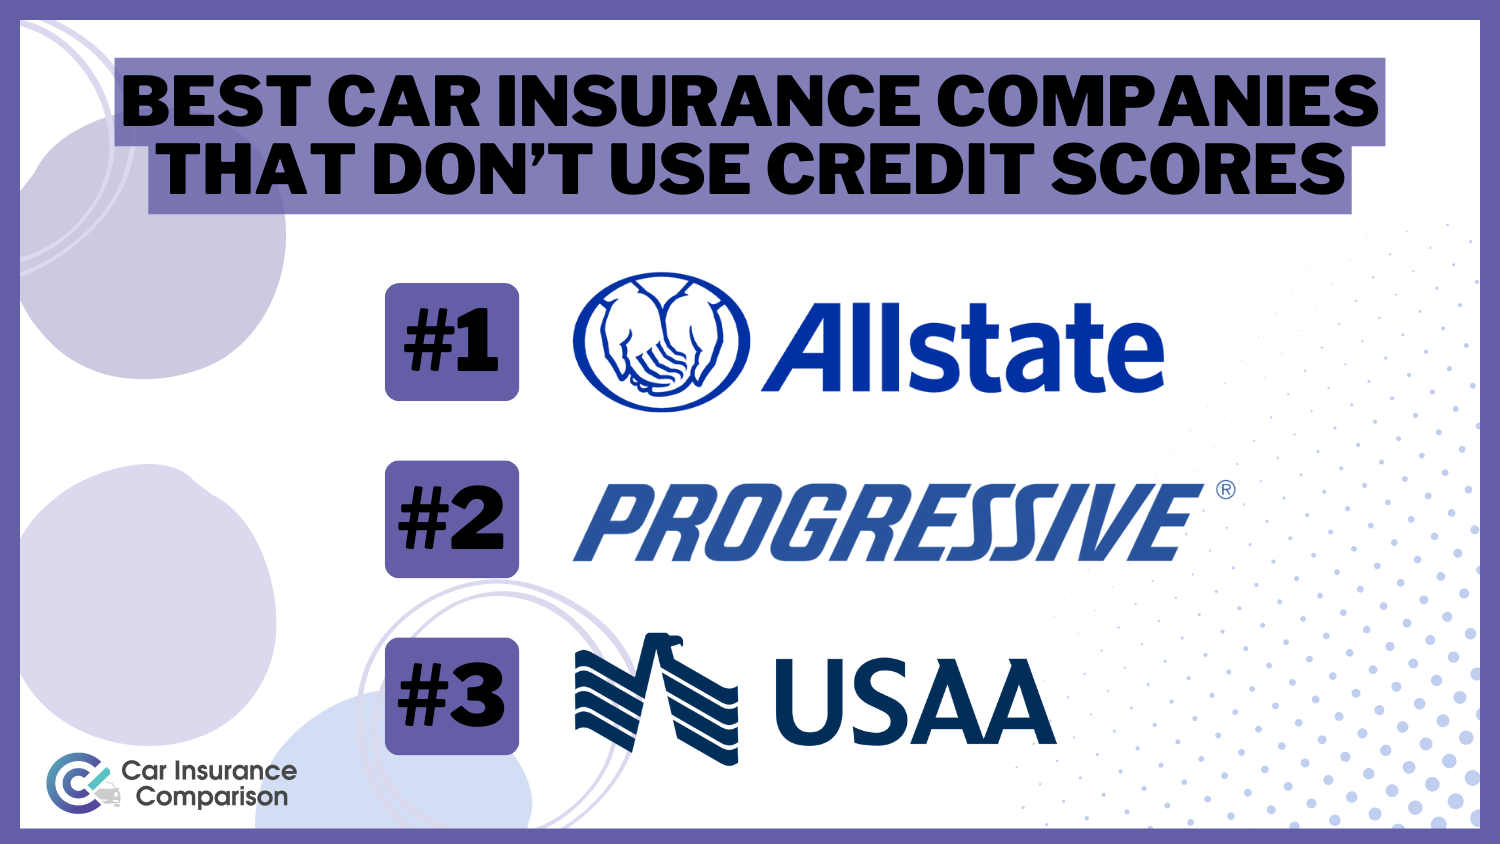 Best Car Insurance Companies That Don’t Use Credit Scores